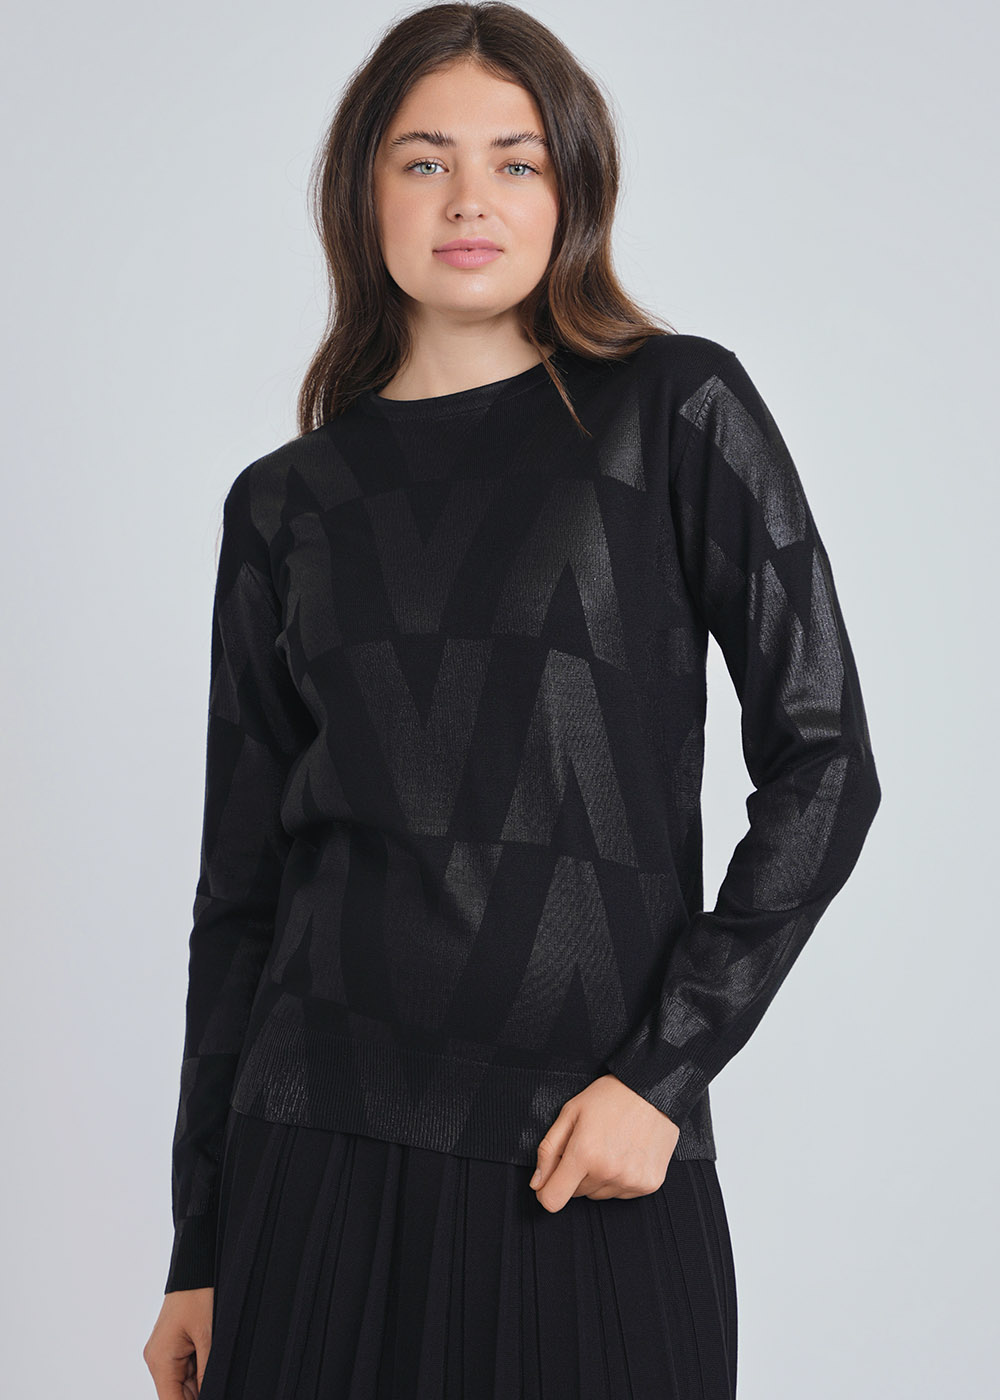 Black Knit Top with V-Structured Symmetry